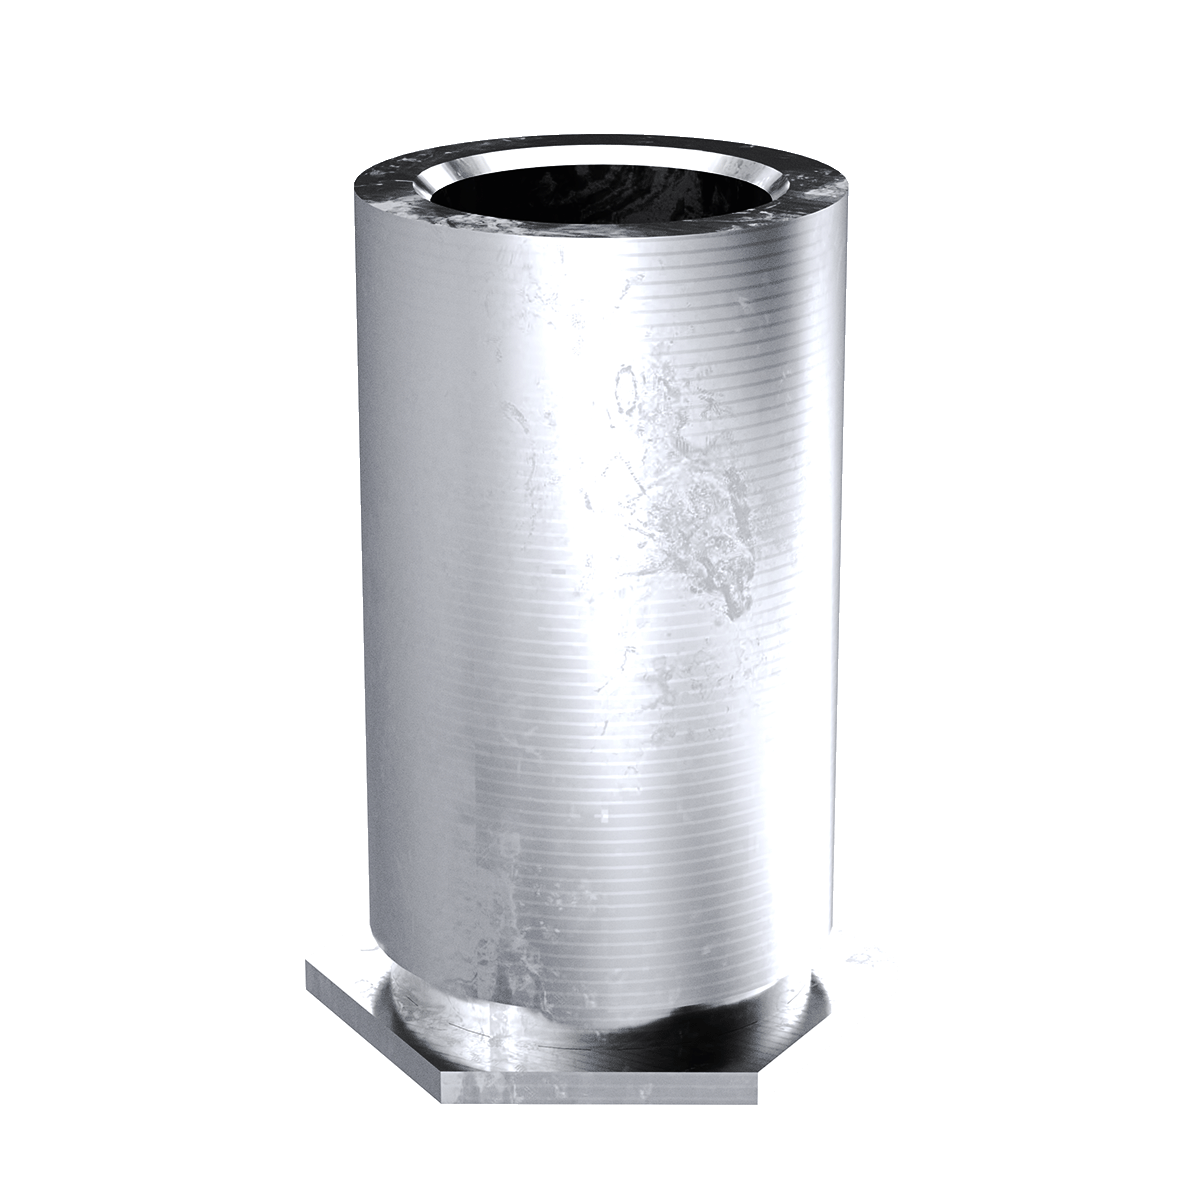 Self-Clinching Standoff, Through Unthreaded, 300 Series Stainless Steel, Passivated, 0.116 x 0.500, 100 Pack